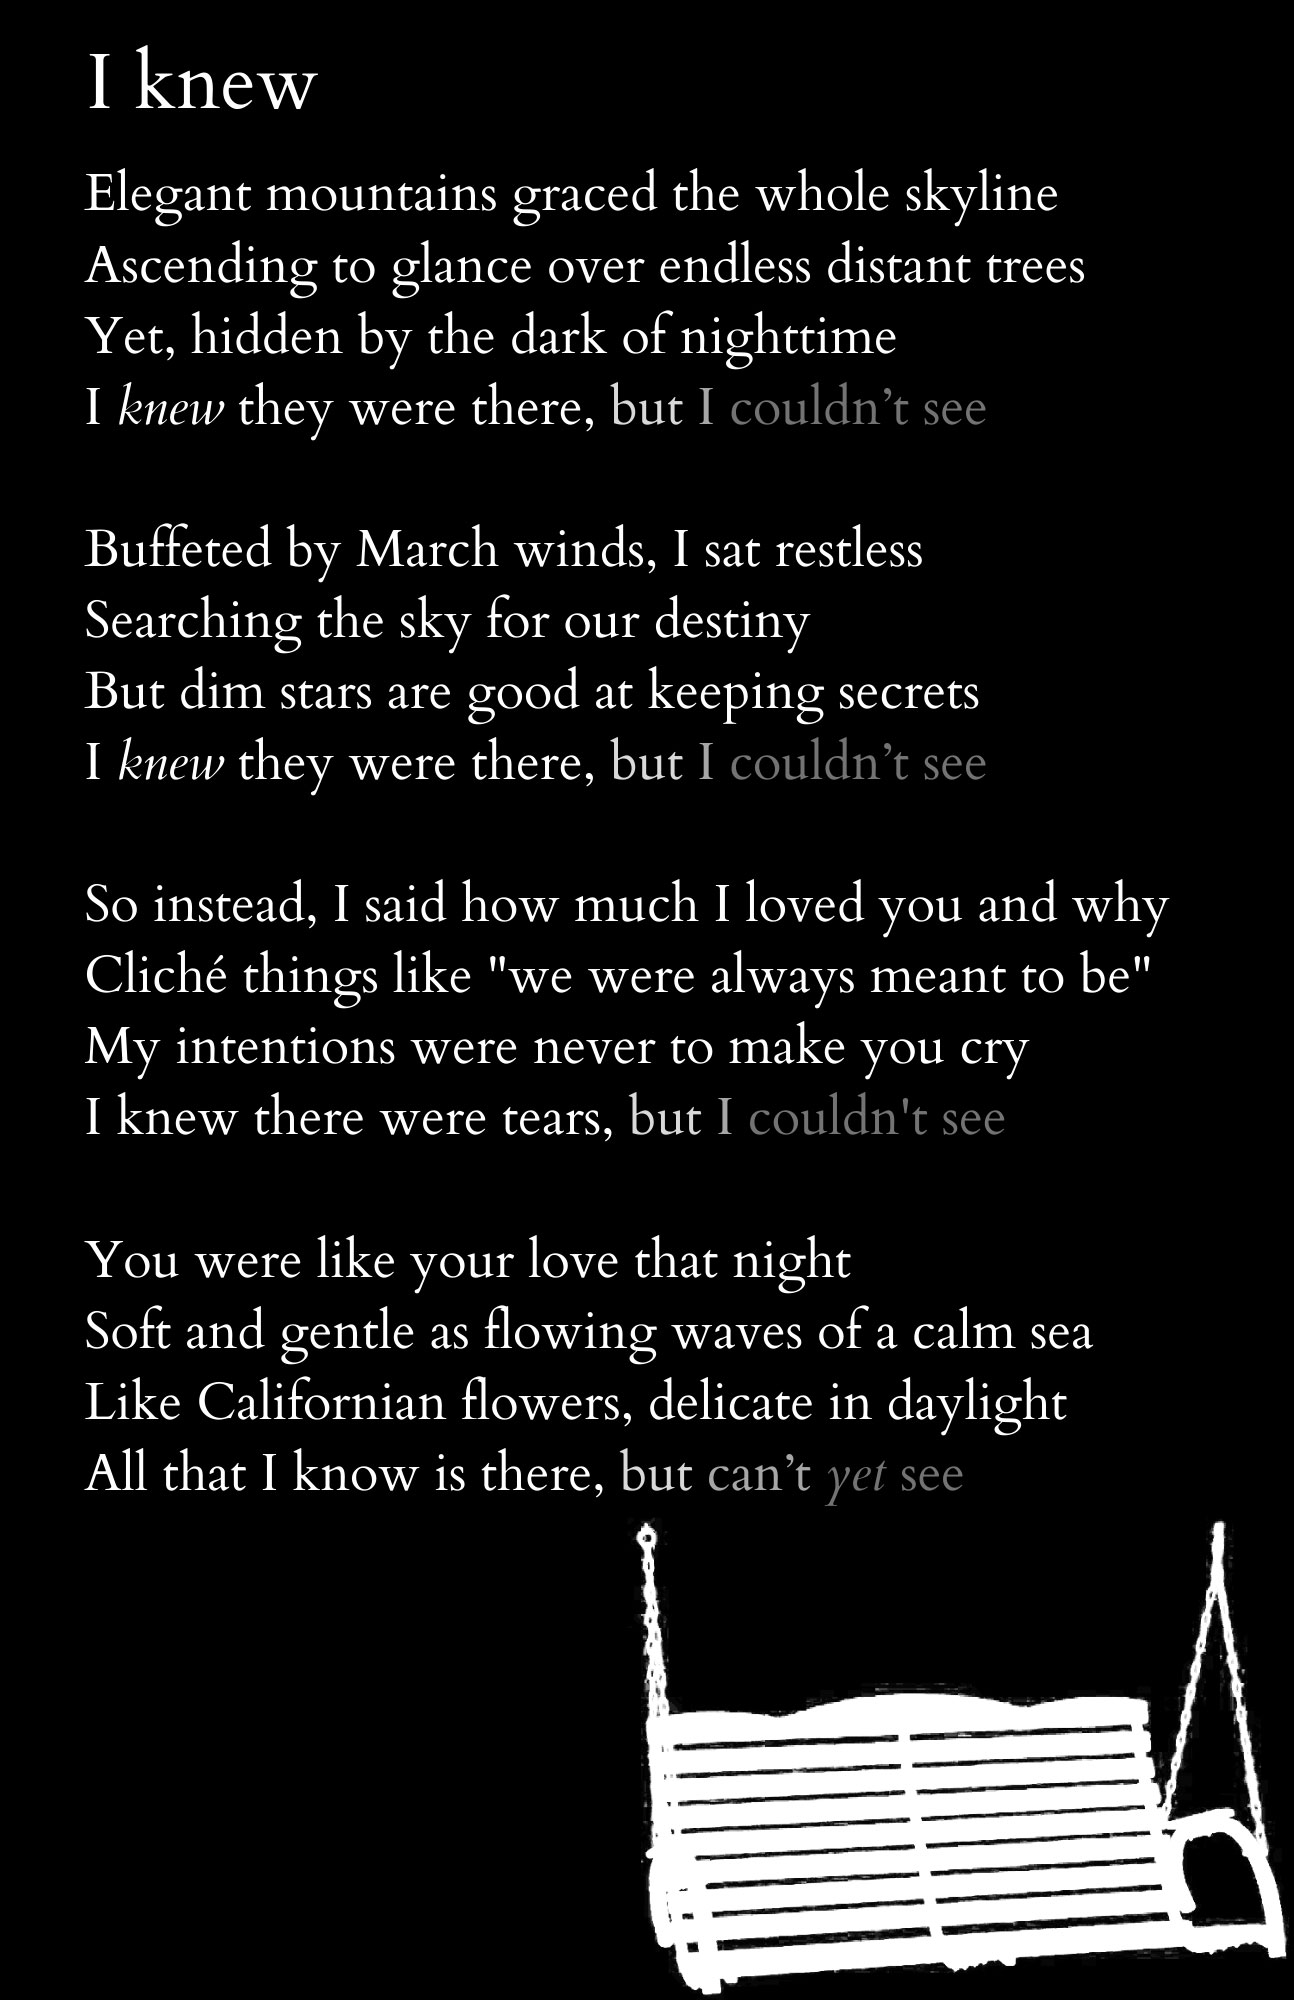 Poem typed on black background with a white porch swing below the poem